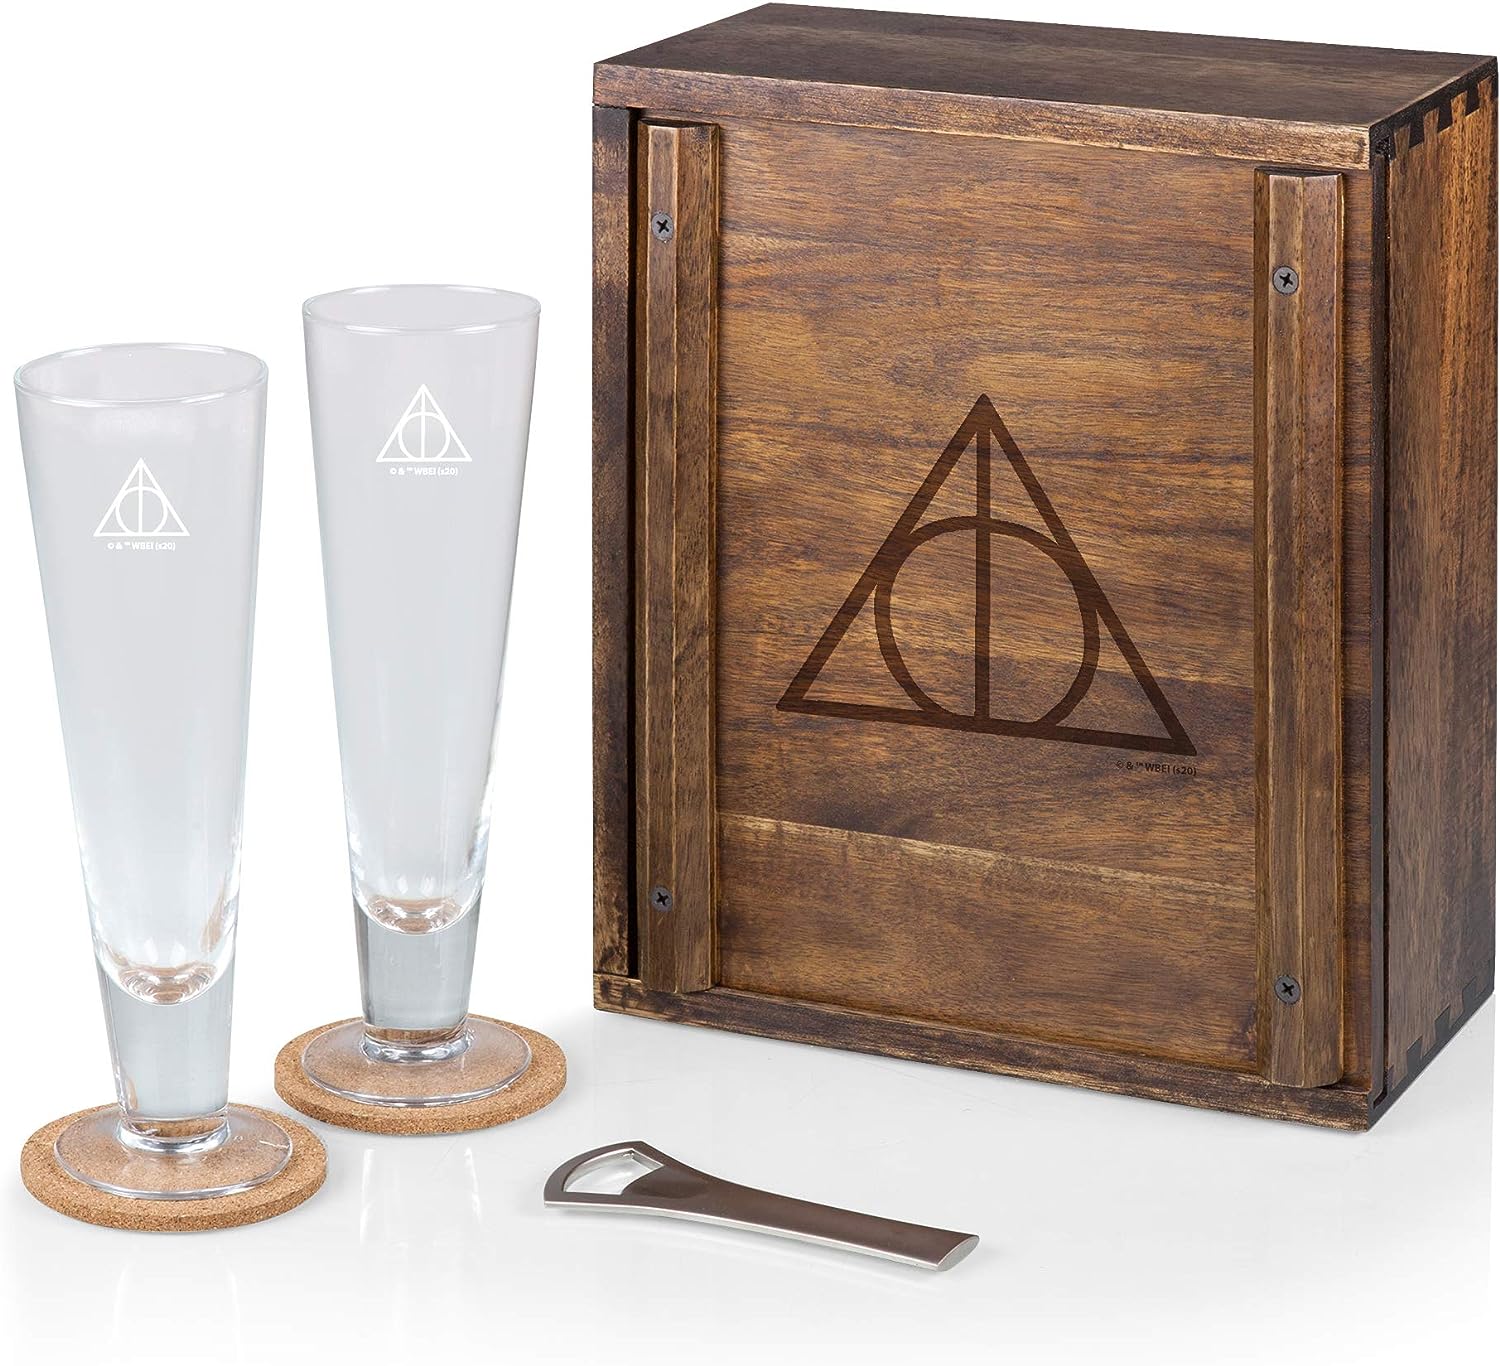 PICNIC TIME LEGACY - a brand - Harry Potter Deathly Hallows Drinking Glasses Gift Set, Harry Potter Gifts, (Acacia Wood)